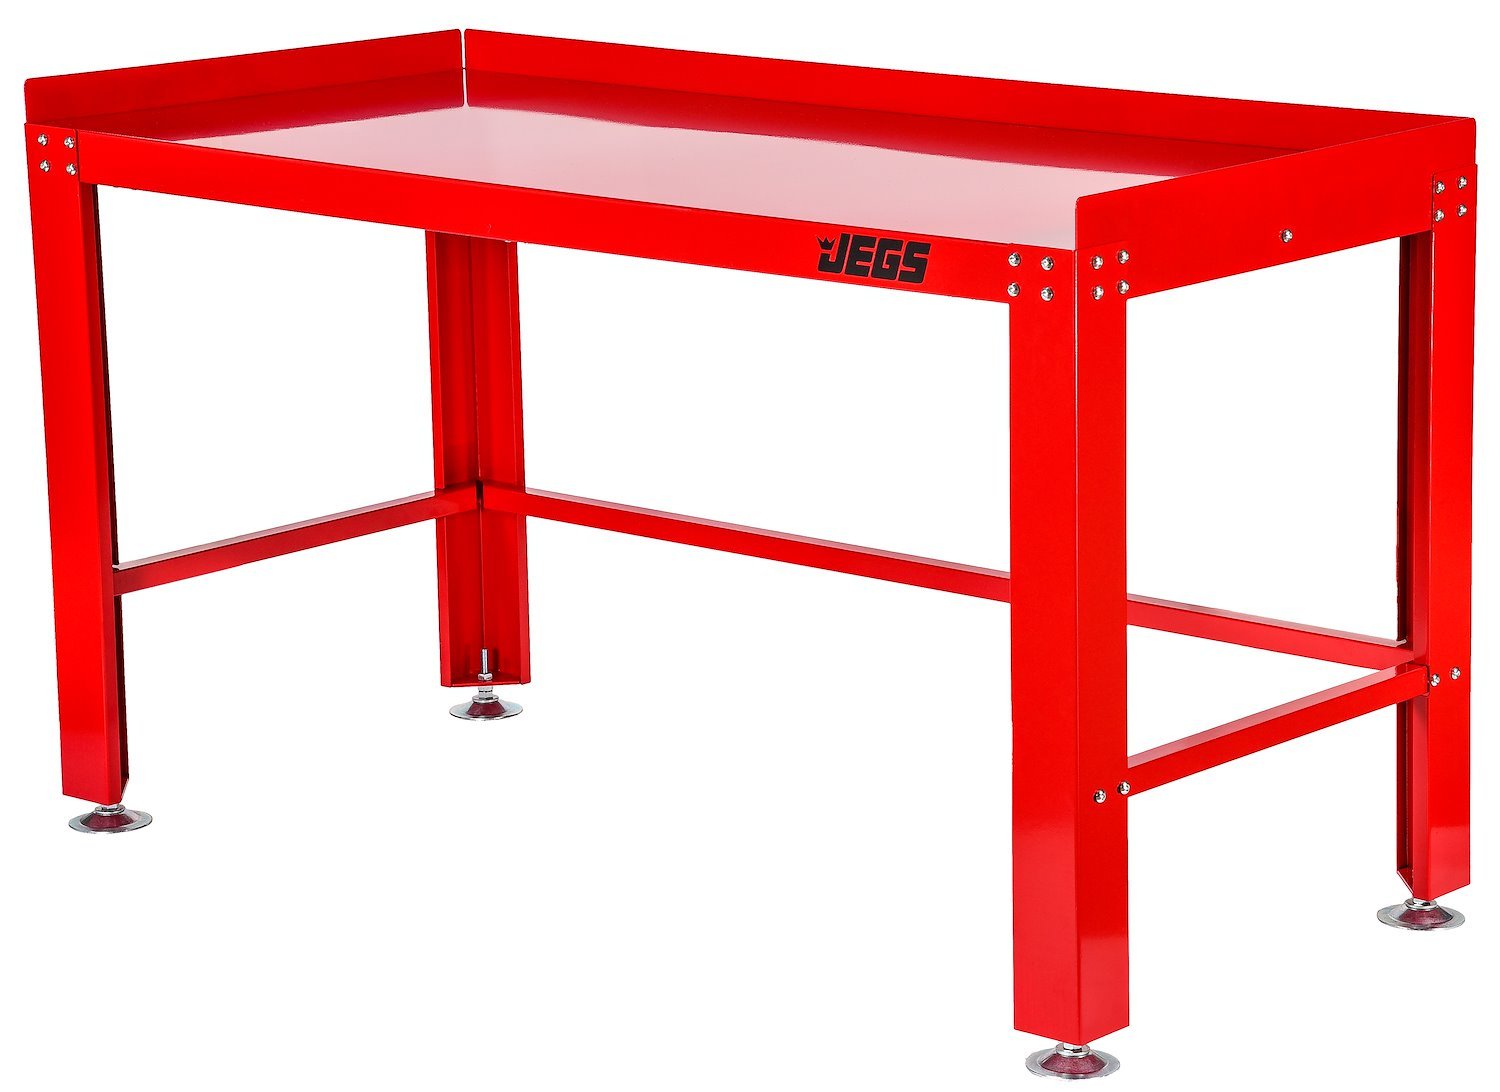 JEGS 81440: Heavy-Duty Work Bench with 59.5 in. x 27.5 in. Bench Top - JEGS